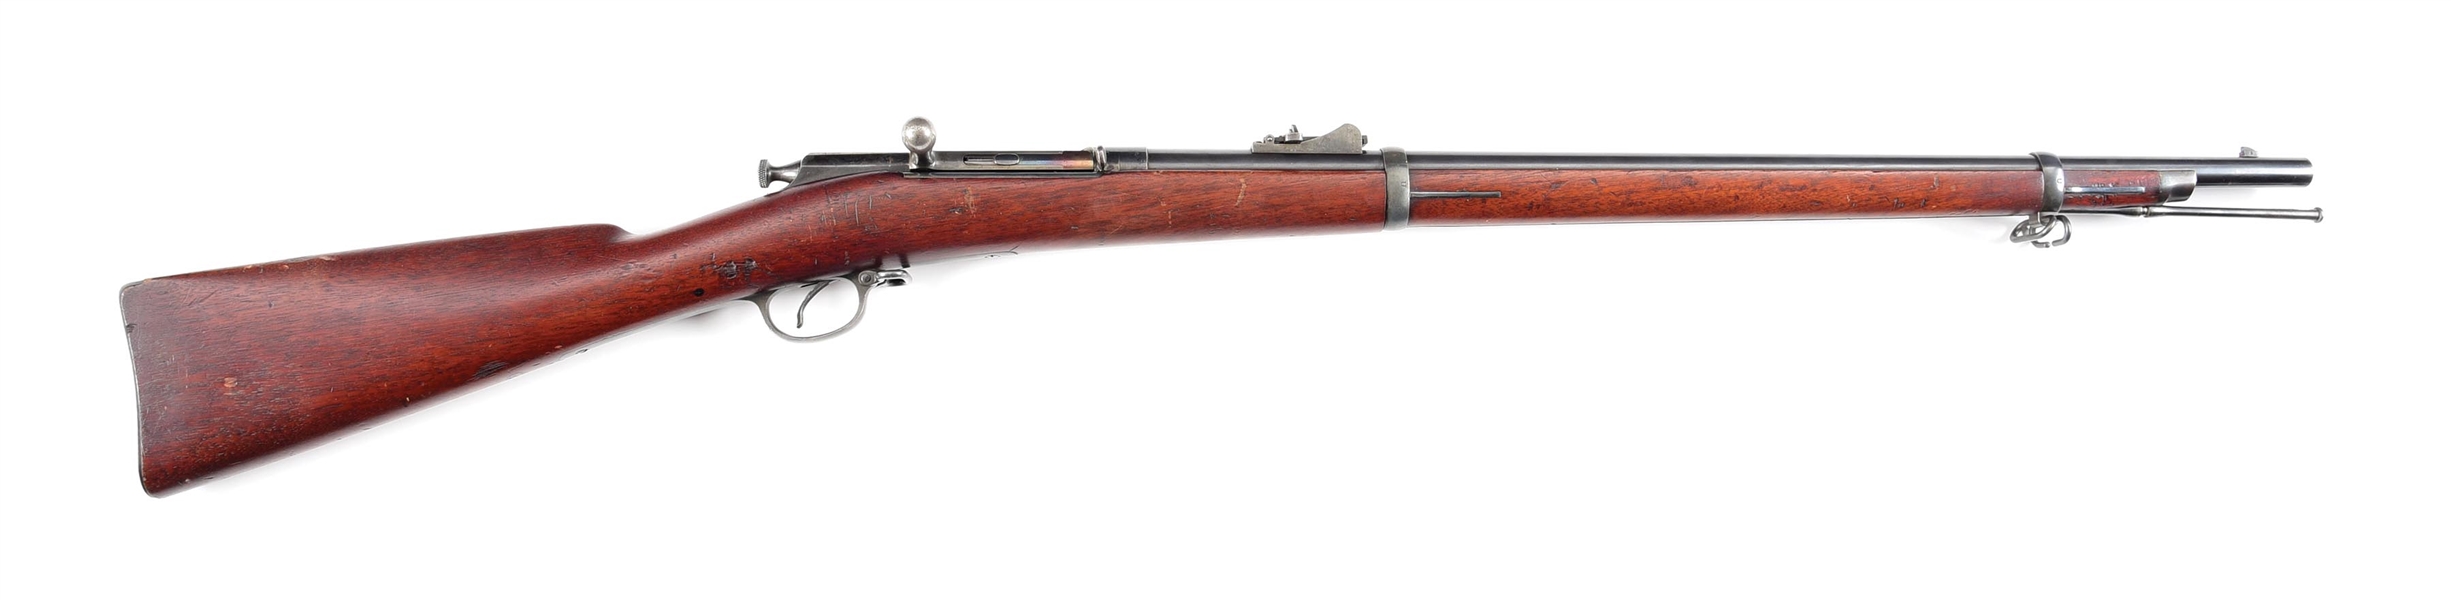 (A) RARE HIGH CONDITION SPRINGFIELD MODEL 1882 CHAFFEE-REECE RIFLE WITH SMITHSONIAN PROVENANCE.